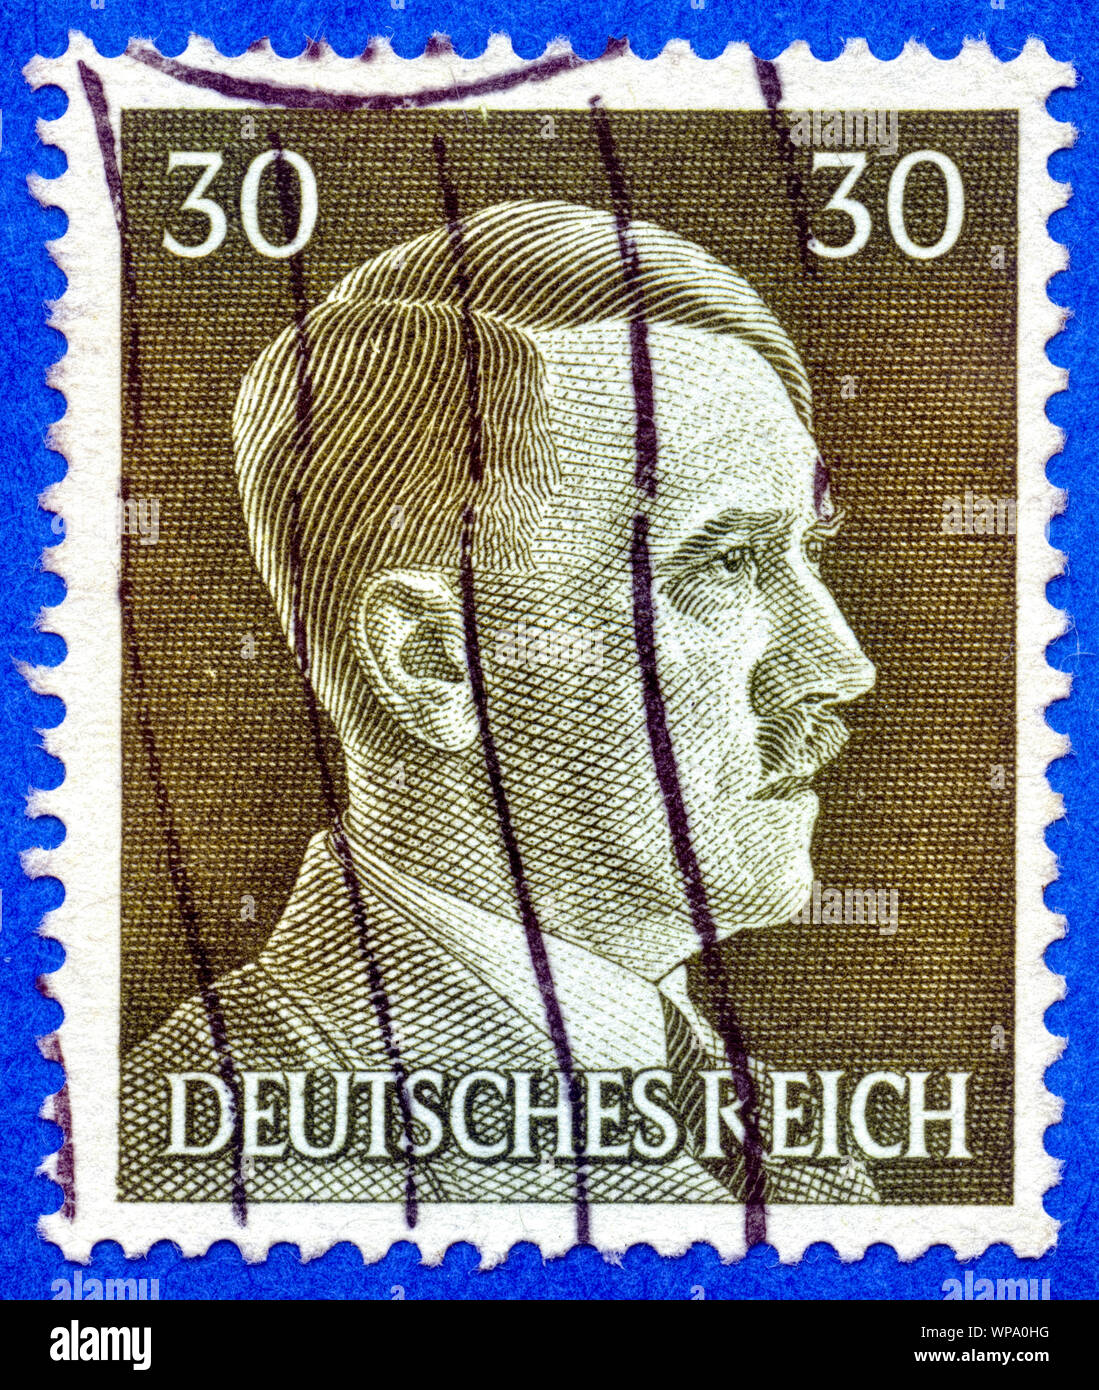 GERMANY - CIRCA 1942: An GERMANY Used Postage Stamp showing Portrait of Adolf Hitler, circa 1942. Stock Photo